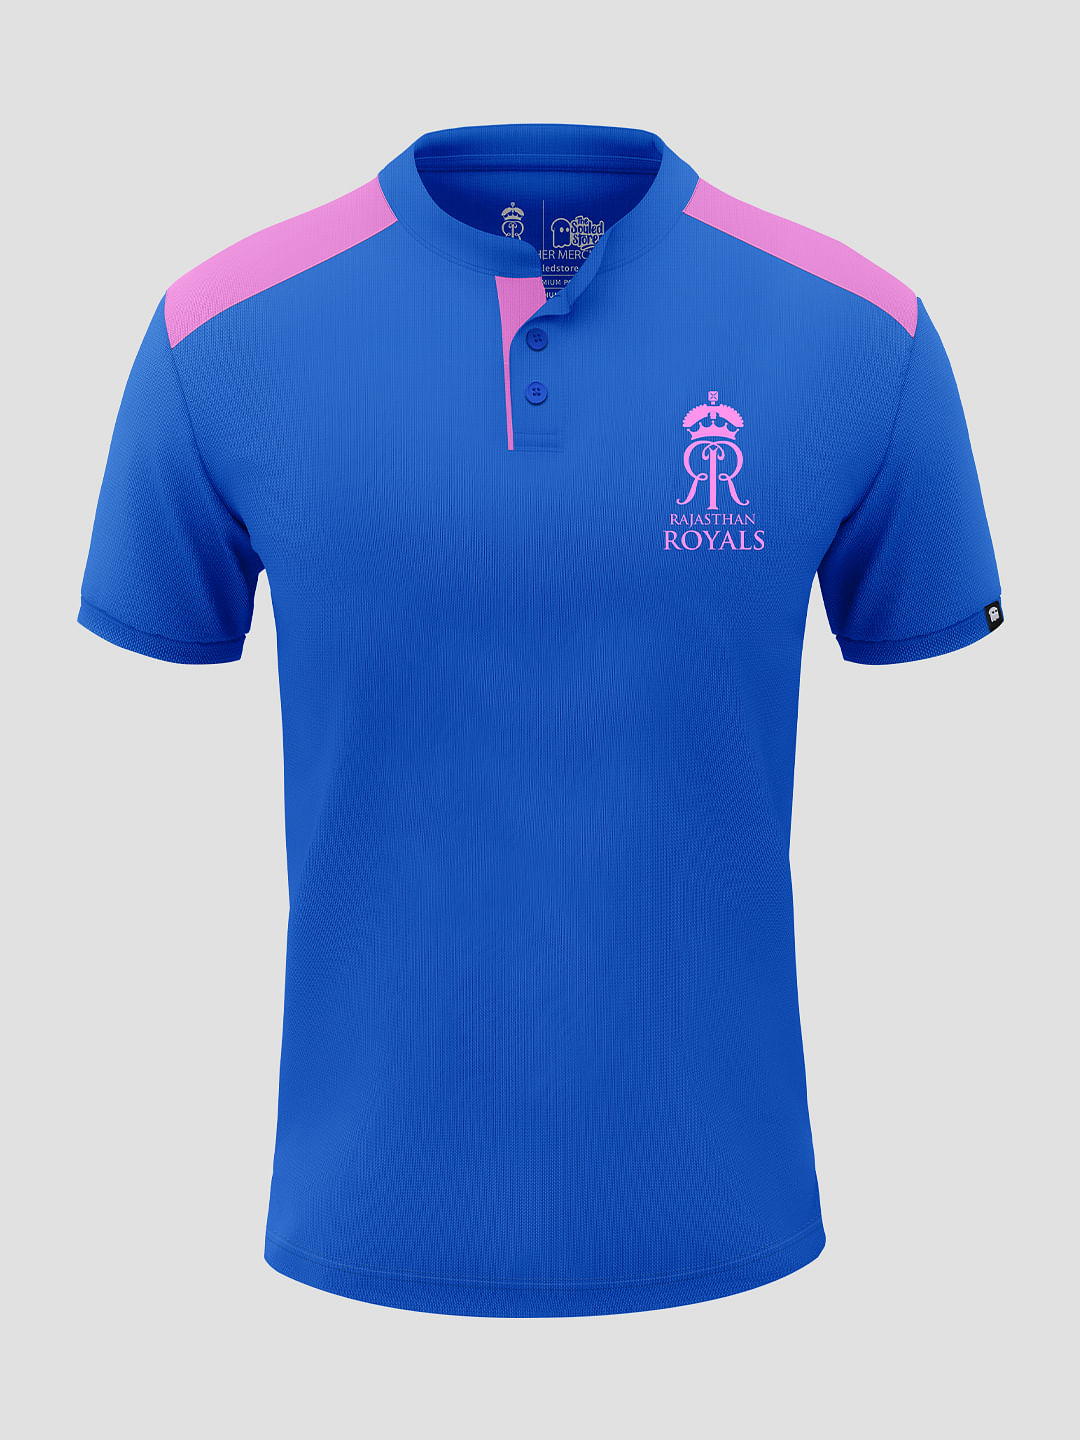 Buy Rajasthan Royals Official Mandarin Collar Fan Jersey (Recycled ...